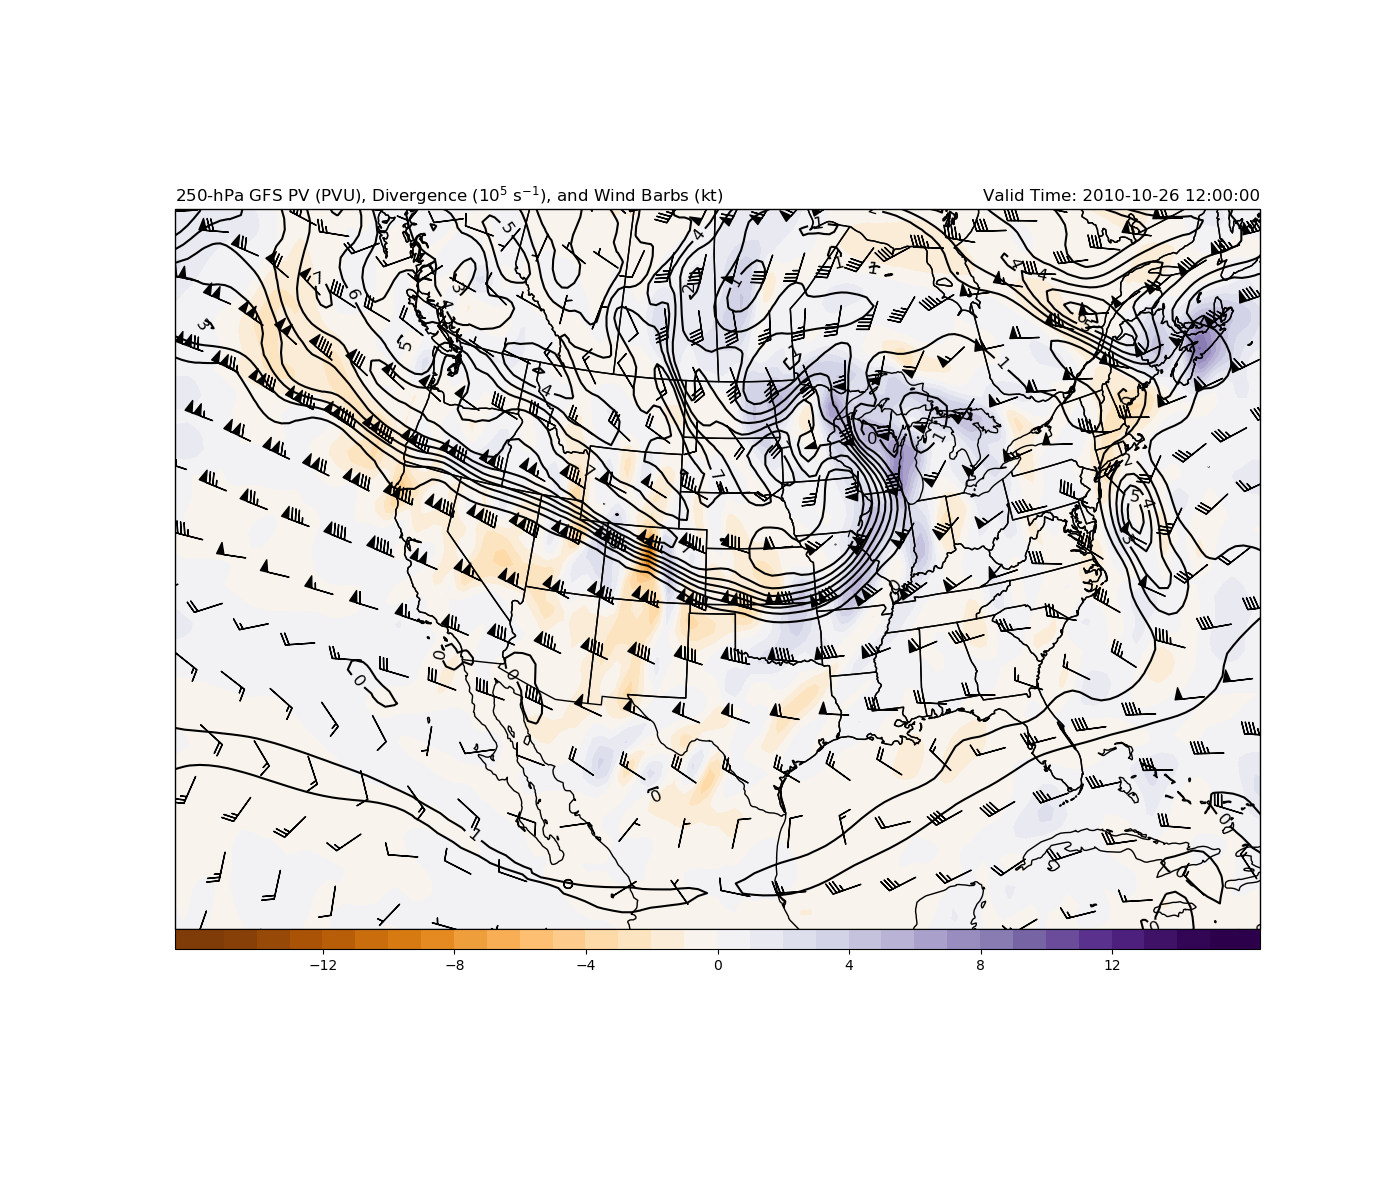 ../_images/sphx_glr_PV_baroclinic_isobaric_001.png